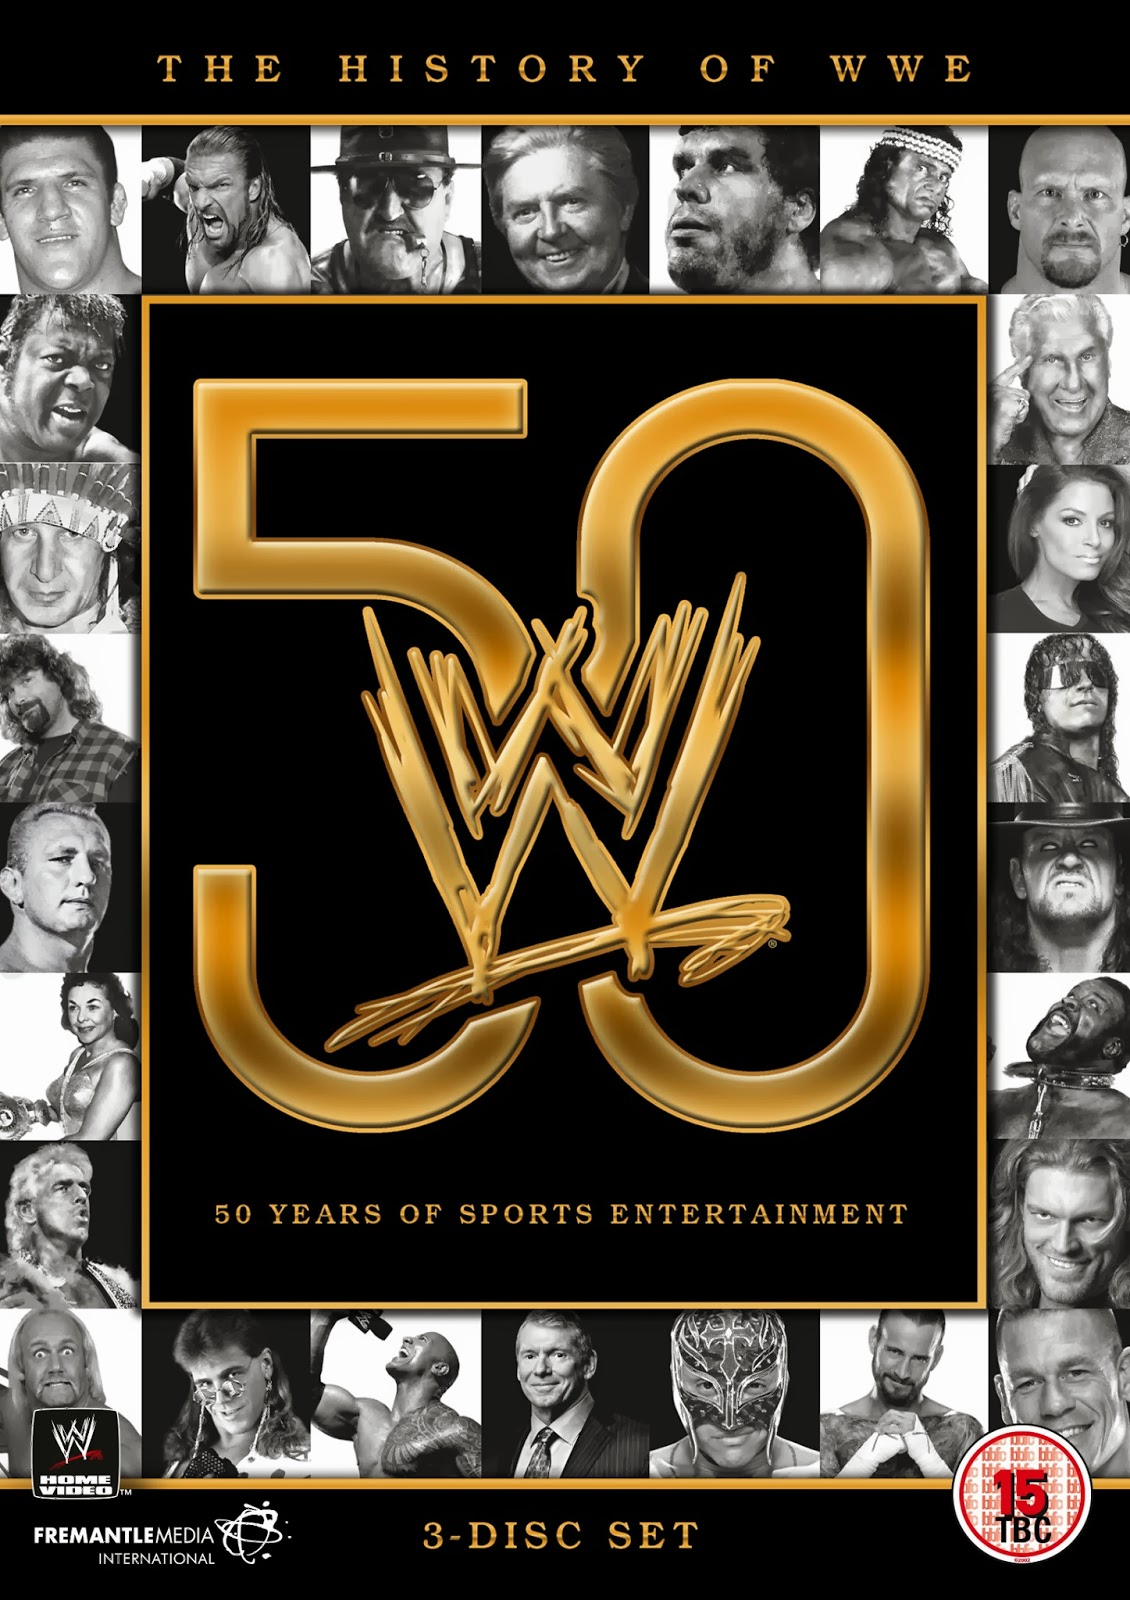 History of WWE - 50 Years of Sports Entertainment | Pro Wrestling